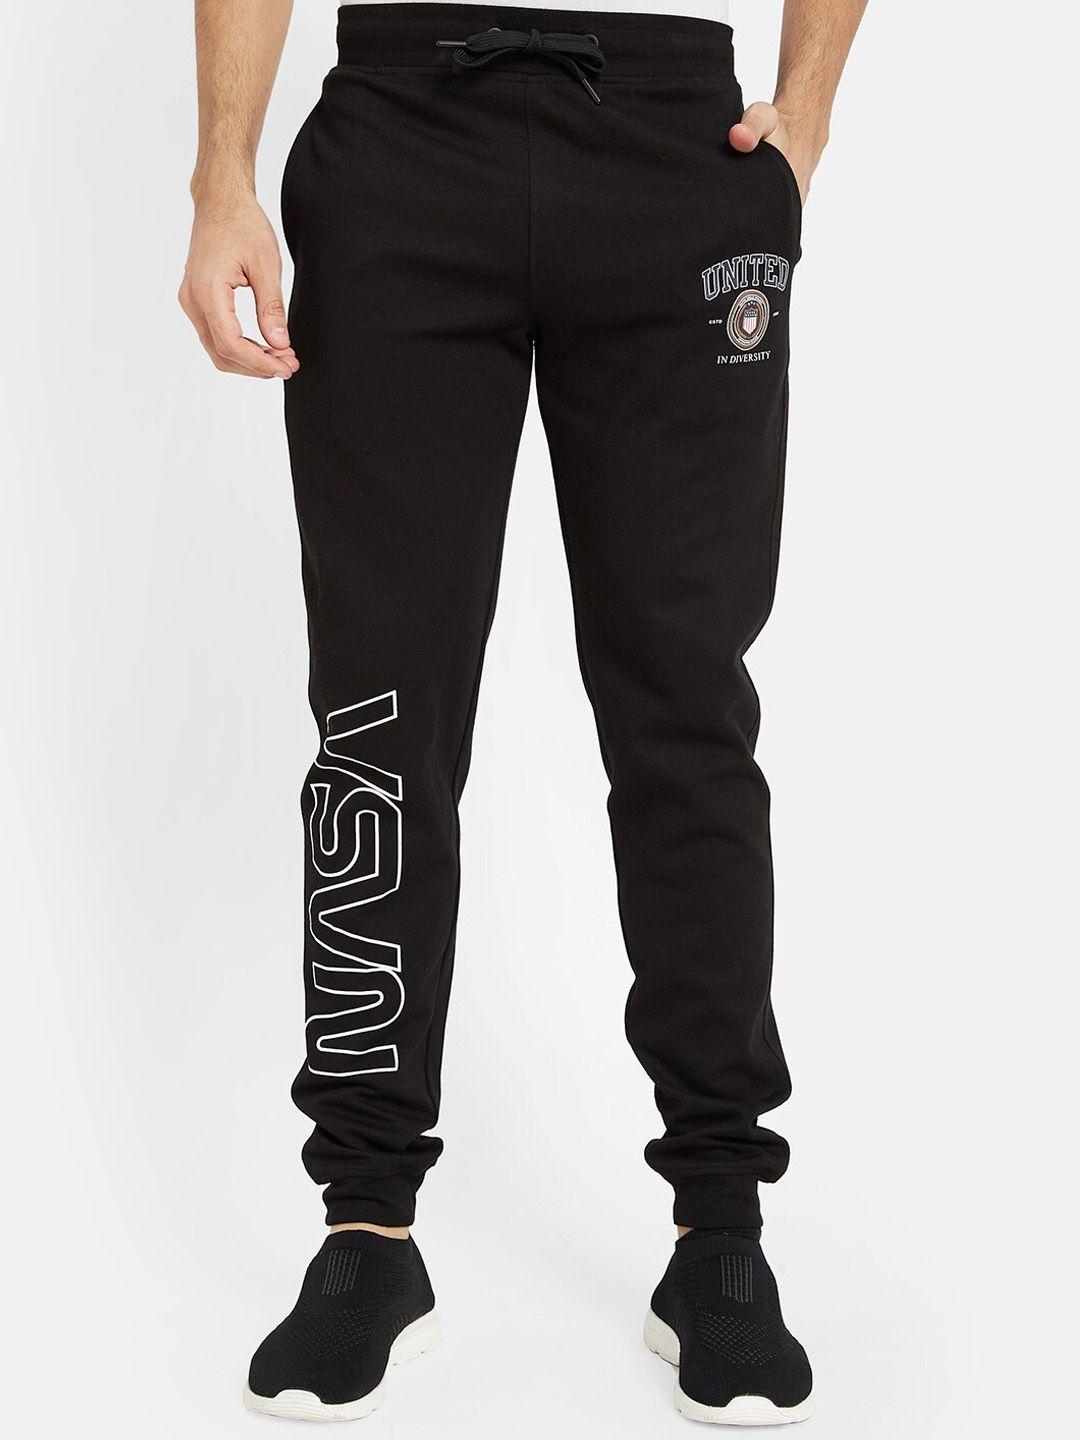 octave men mid-rise typography printed fleece joggers